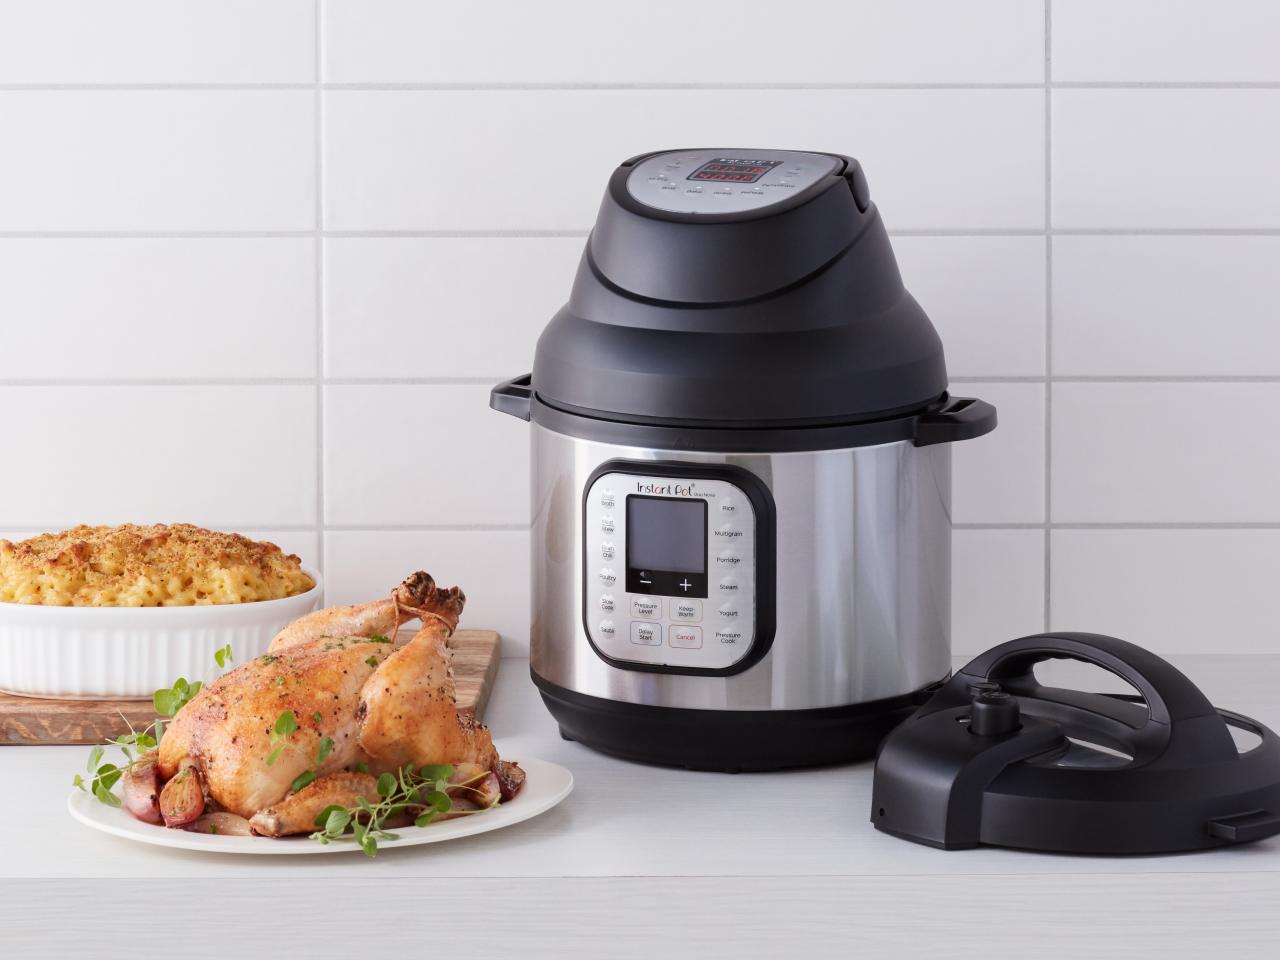 How to Use the Instant Pot Duo Nova 